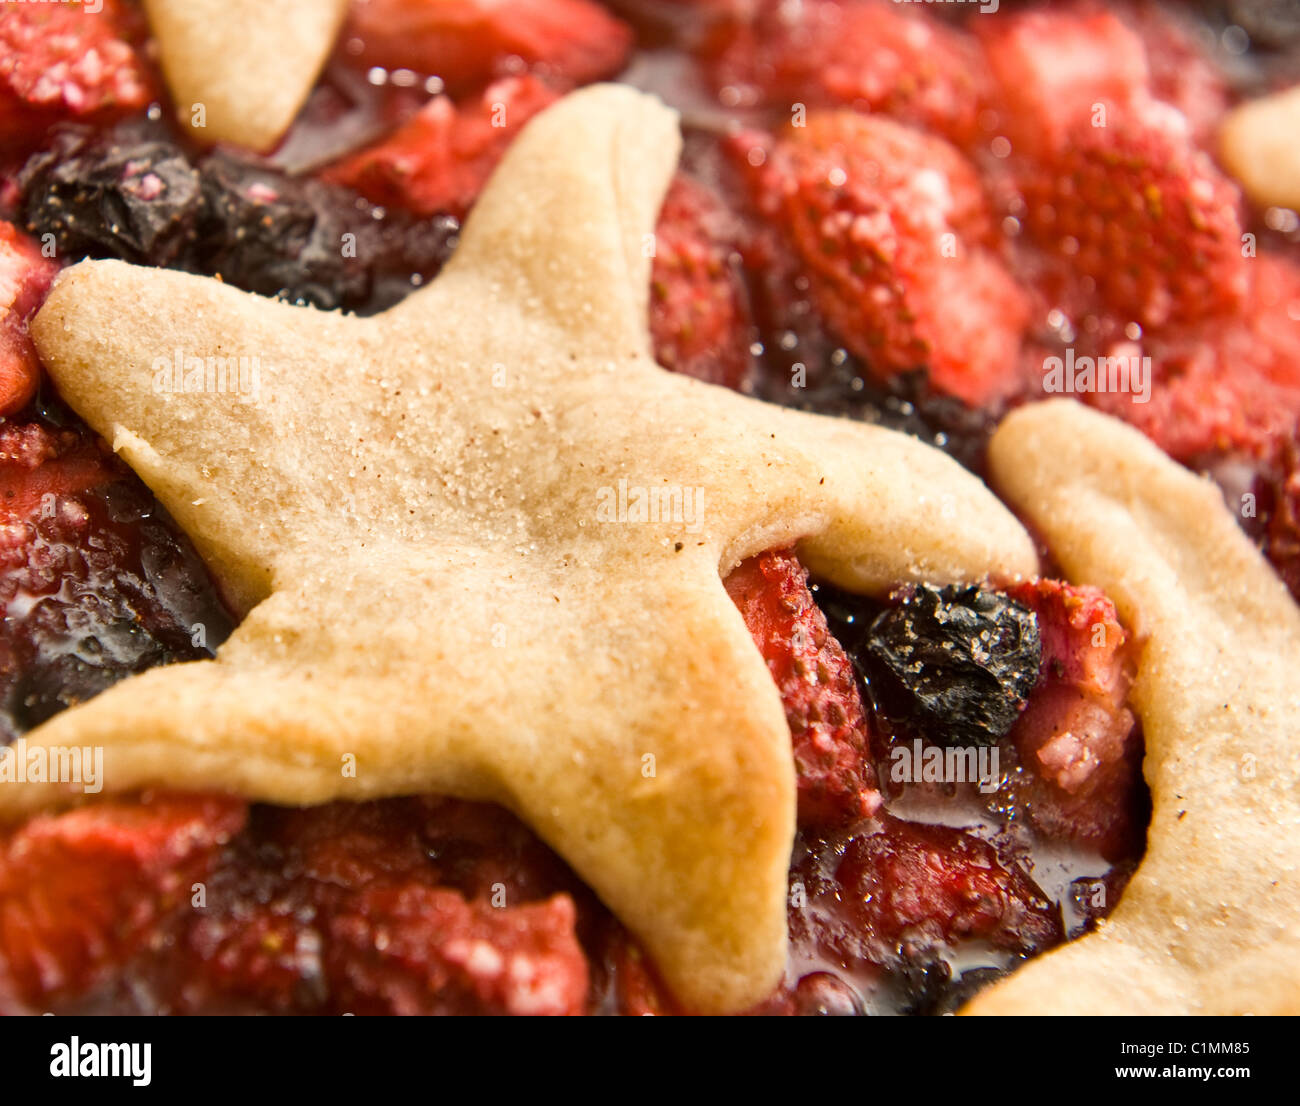 Close-up of a homemade strawberry and blueberry pie with star shaped pastry crust Stock Photo